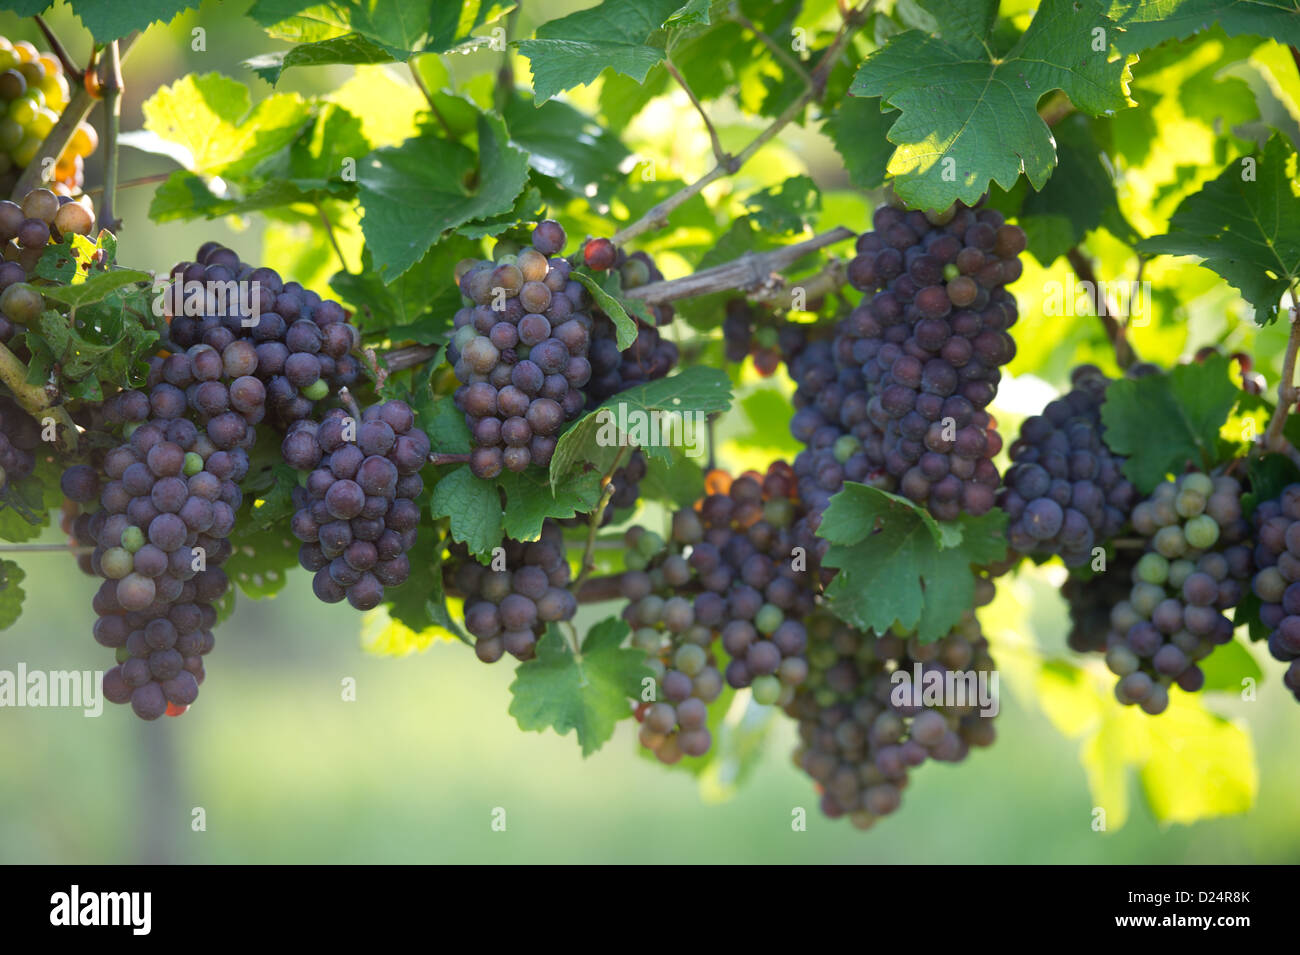 Grapes hanging from the vine  Stock Photo